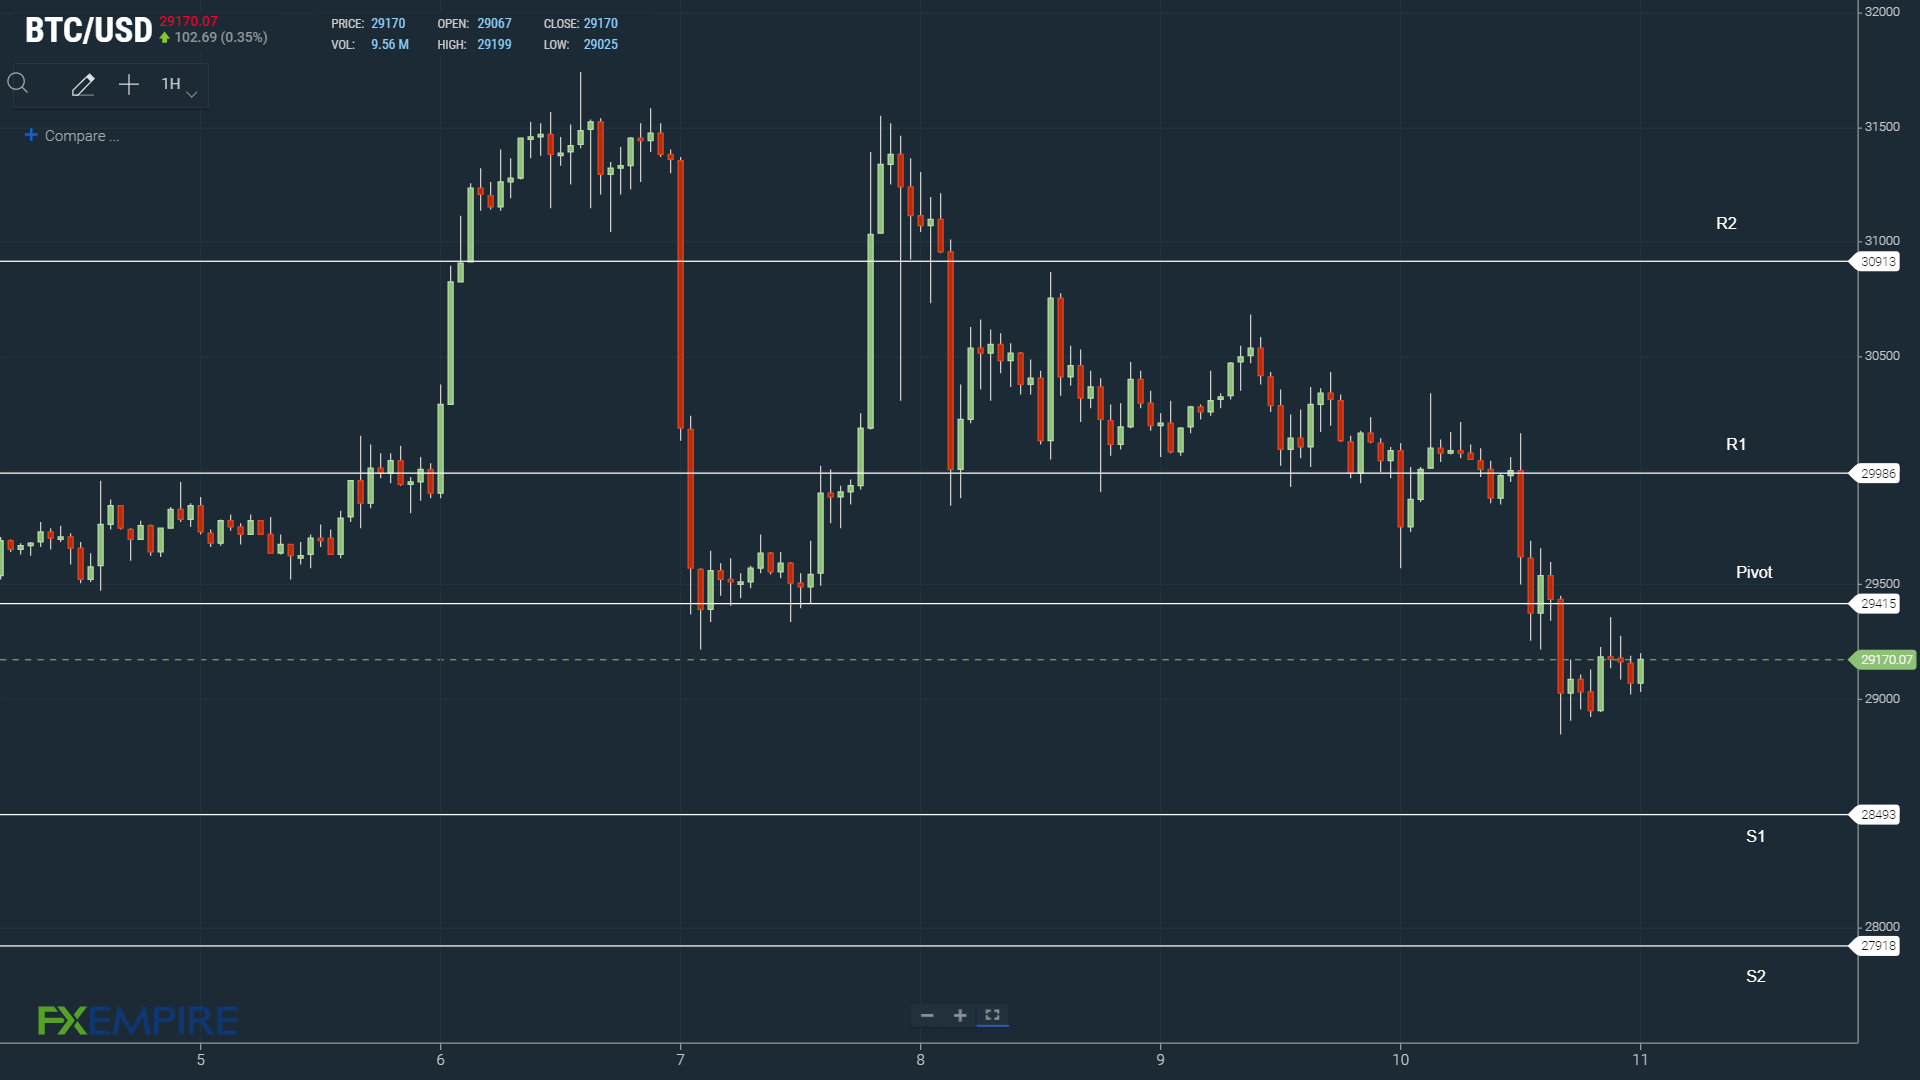 Failure to move through the Pivot would leave BTC under pressure.